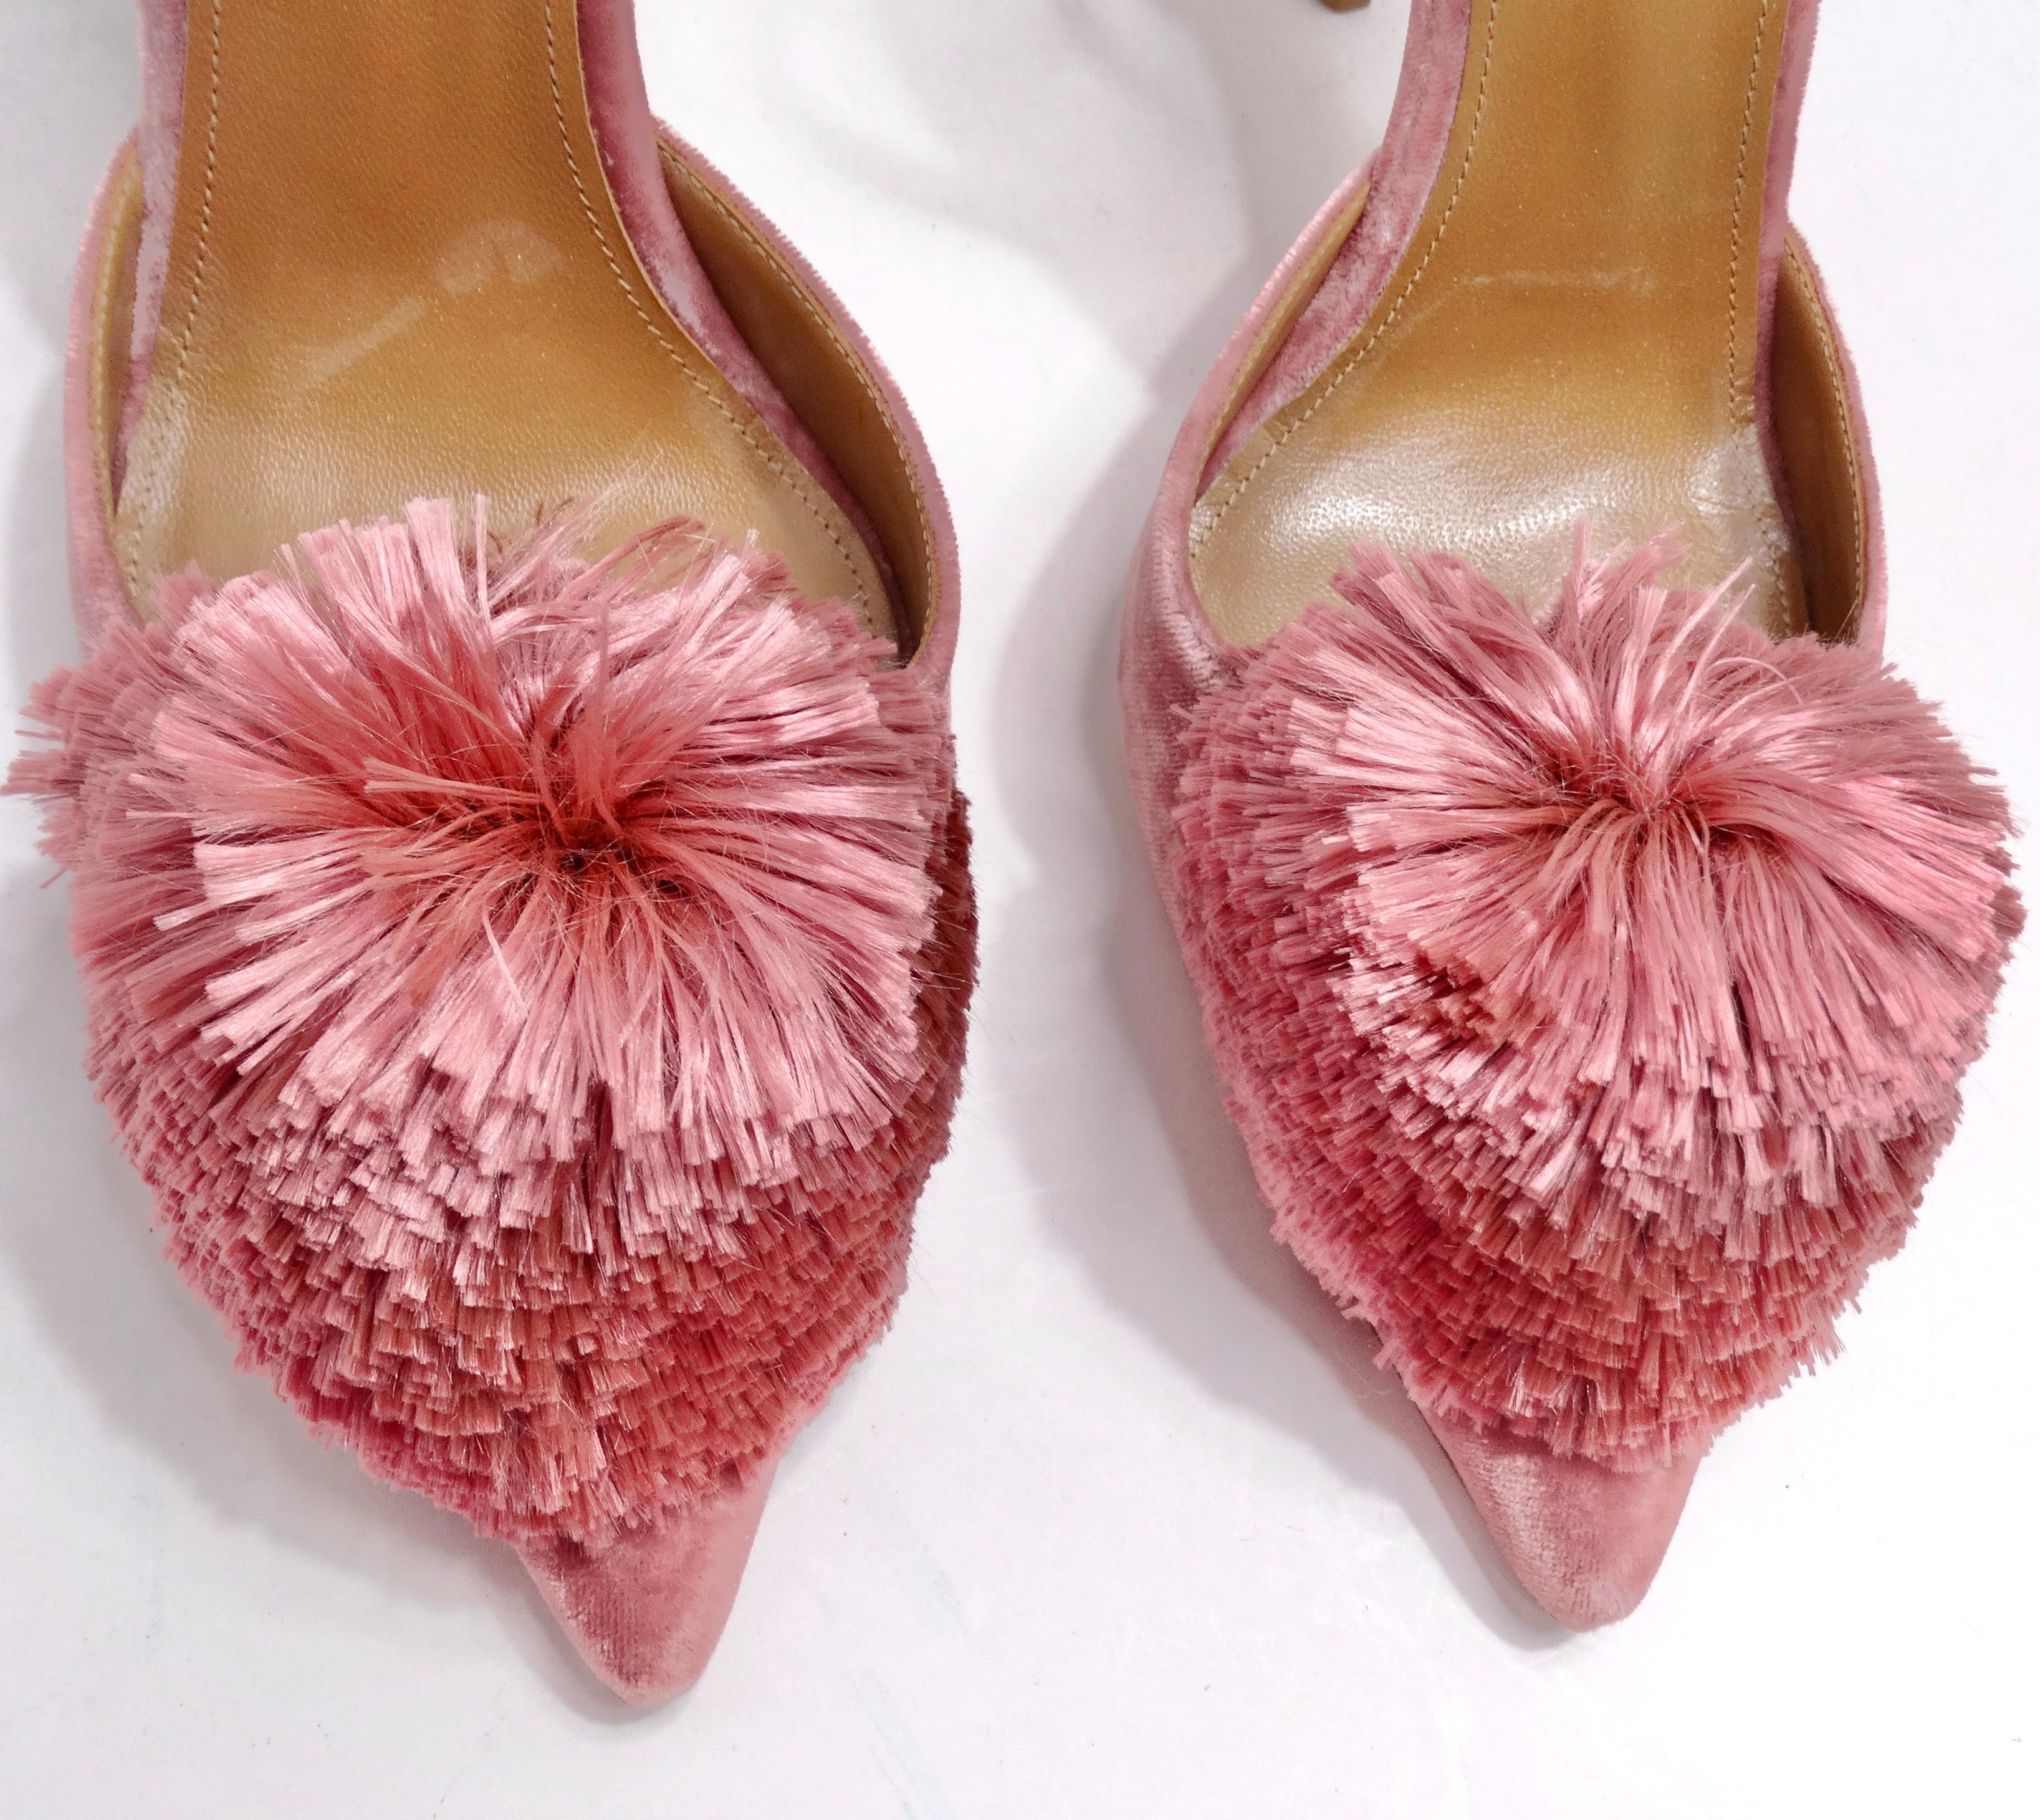 Aquazzura Powder Puff Slingback Heels In Excellent Condition For Sale In Scottsdale, AZ